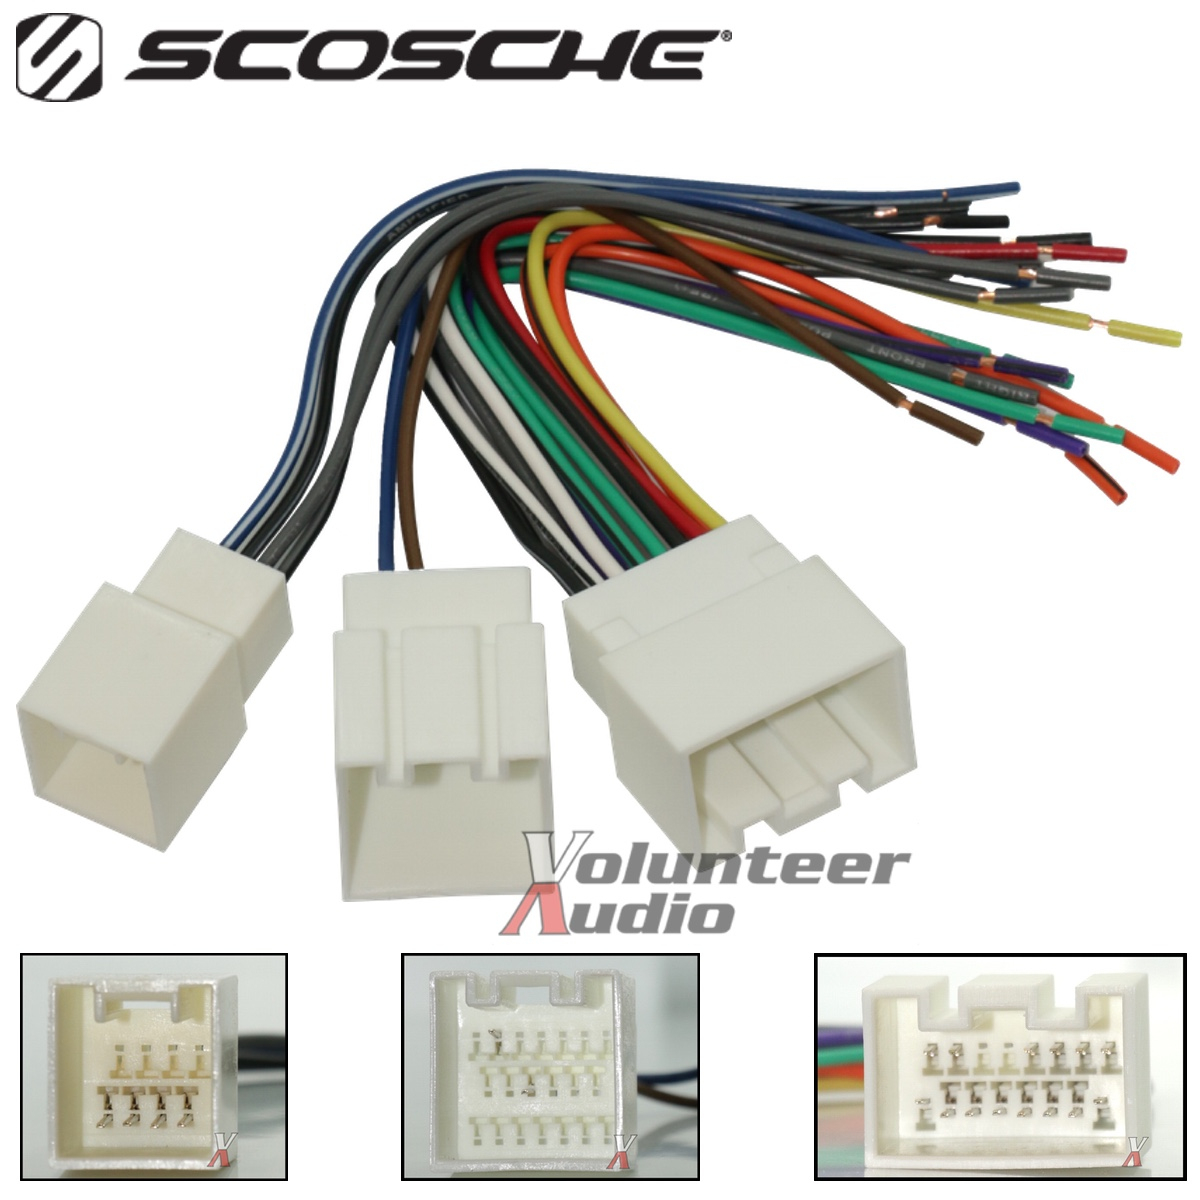 2004 Lincoln Ls Stereo Wiring Diagram - Today Wiring Diagram - Aftermarket Stereo Wiring Diagram